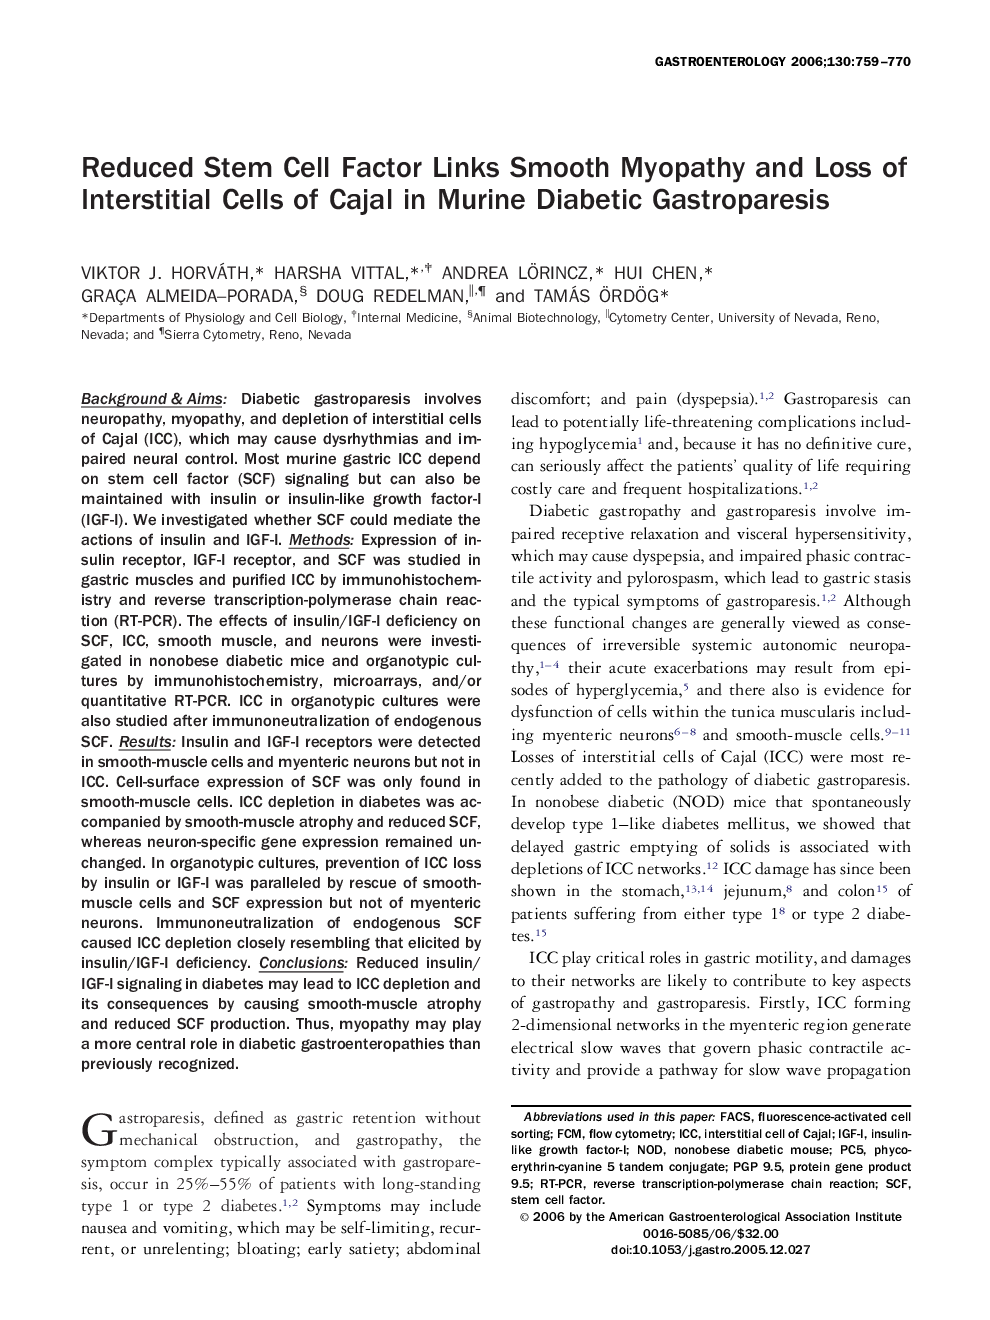 Reduced Stem Cell Factor Links Smooth Myopathy and Loss of Interstitial Cells of Cajal in Murine Diabetic Gastroparesis 